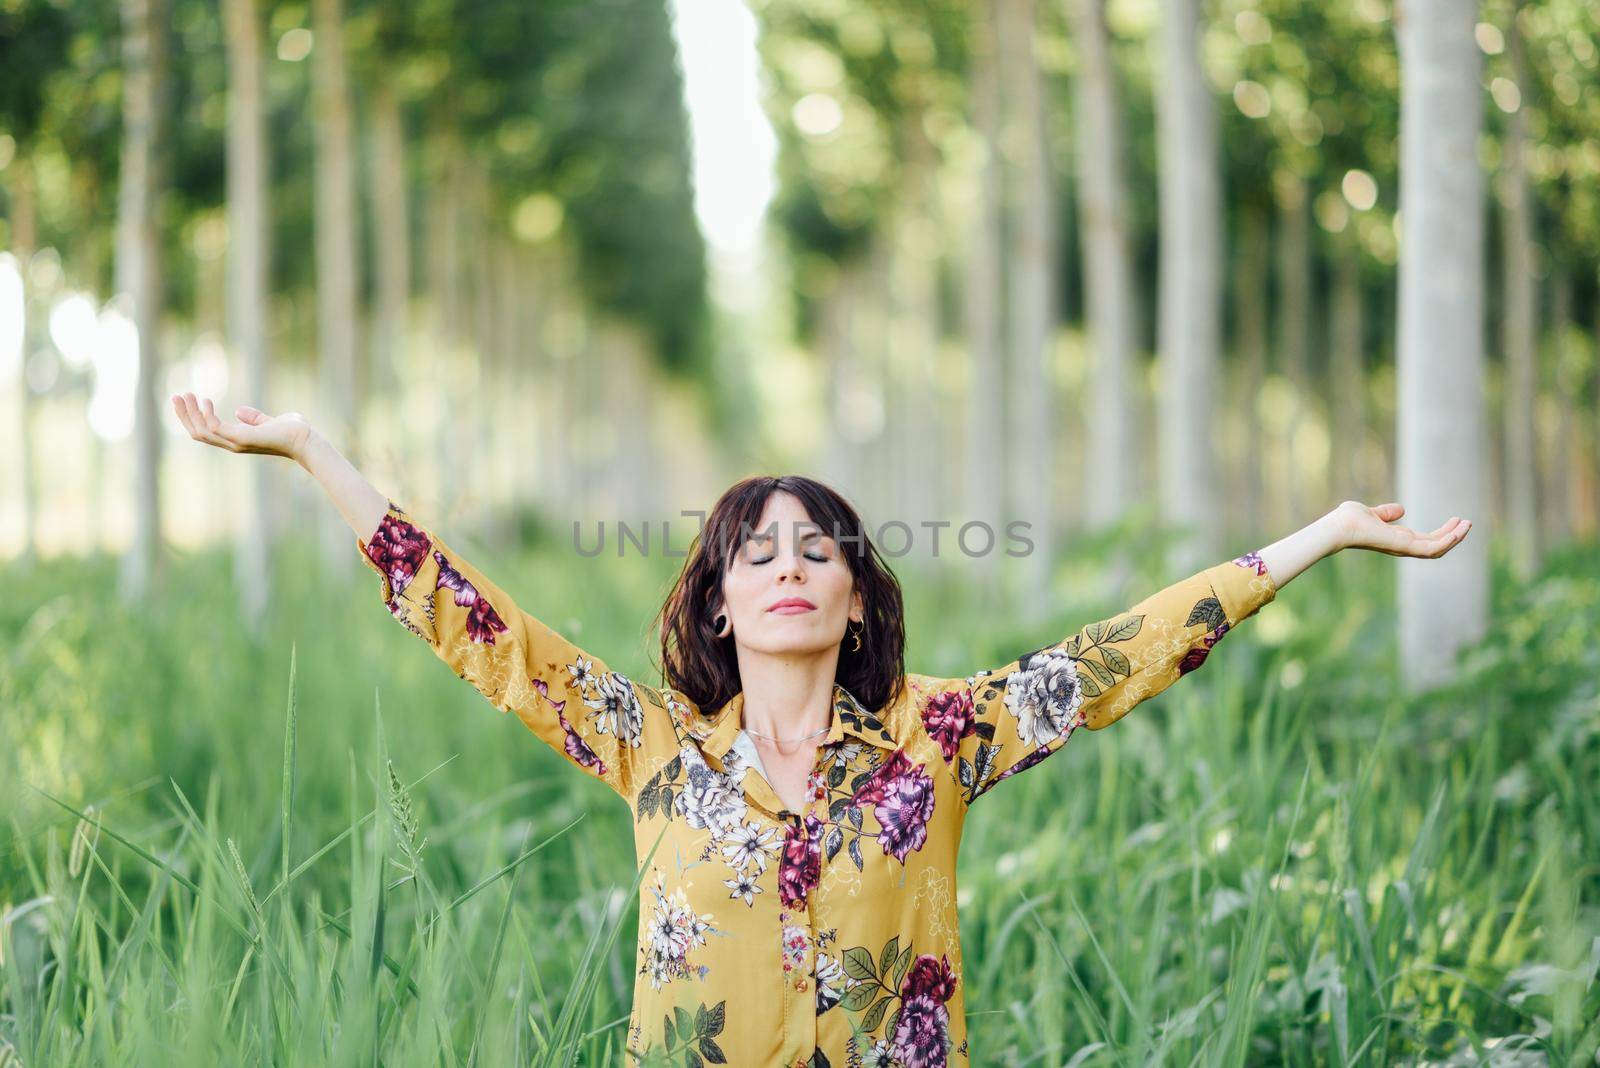 Enjoying the nature. Young woman arms raised enjoying the fresh air in green forest. Female with eyes closed.